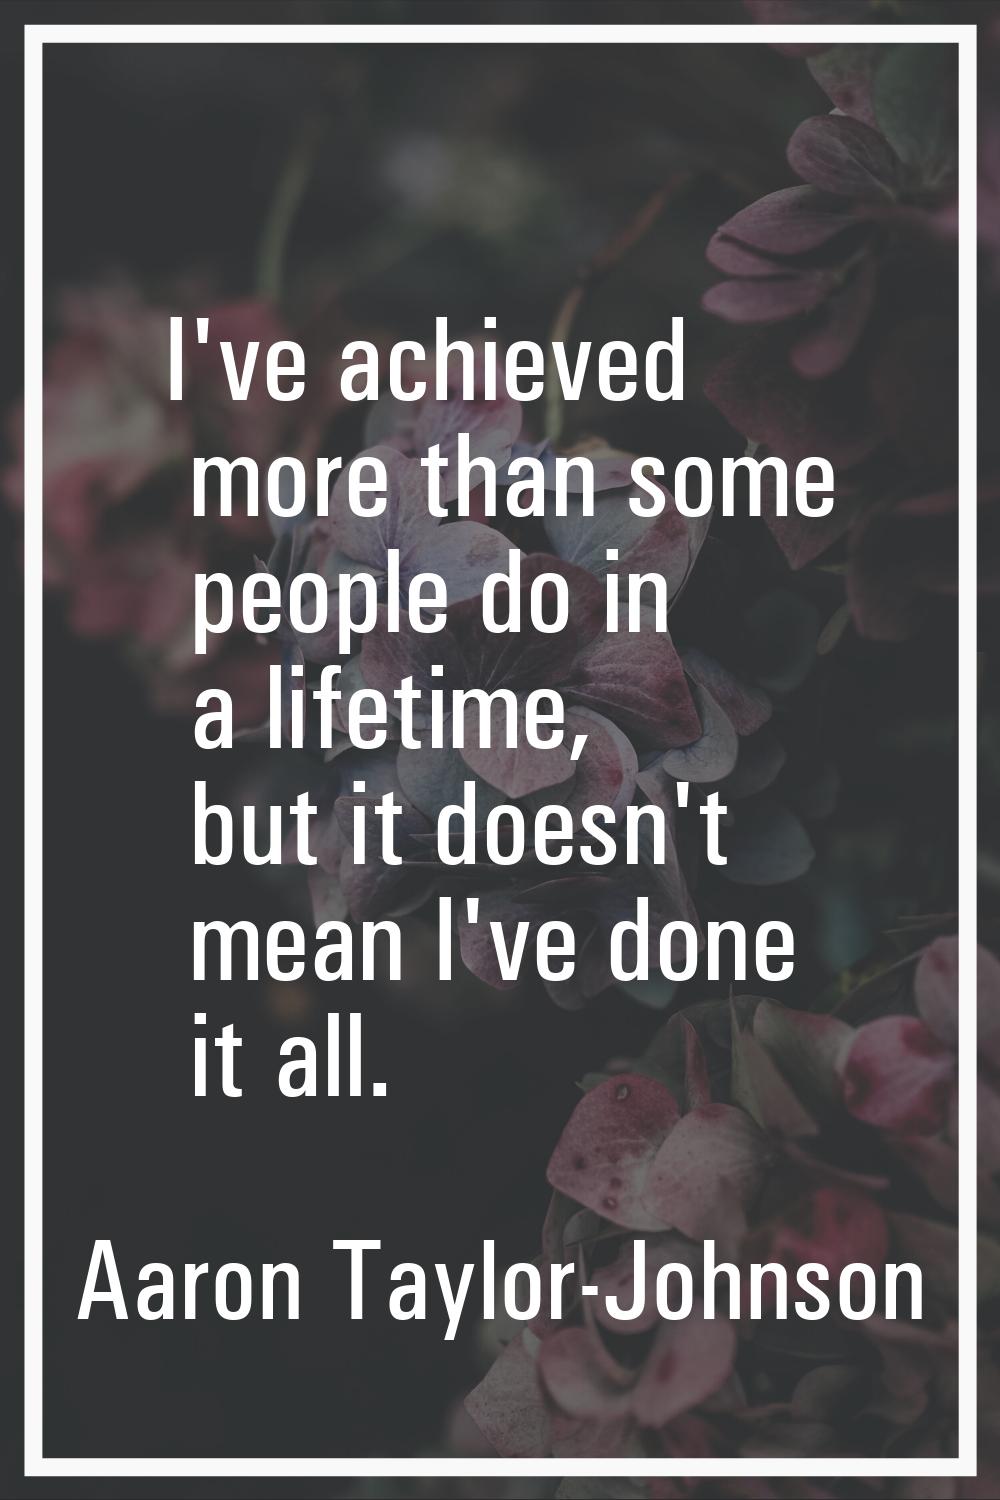 I've achieved more than some people do in a lifetime, but it doesn't mean I've done it all.